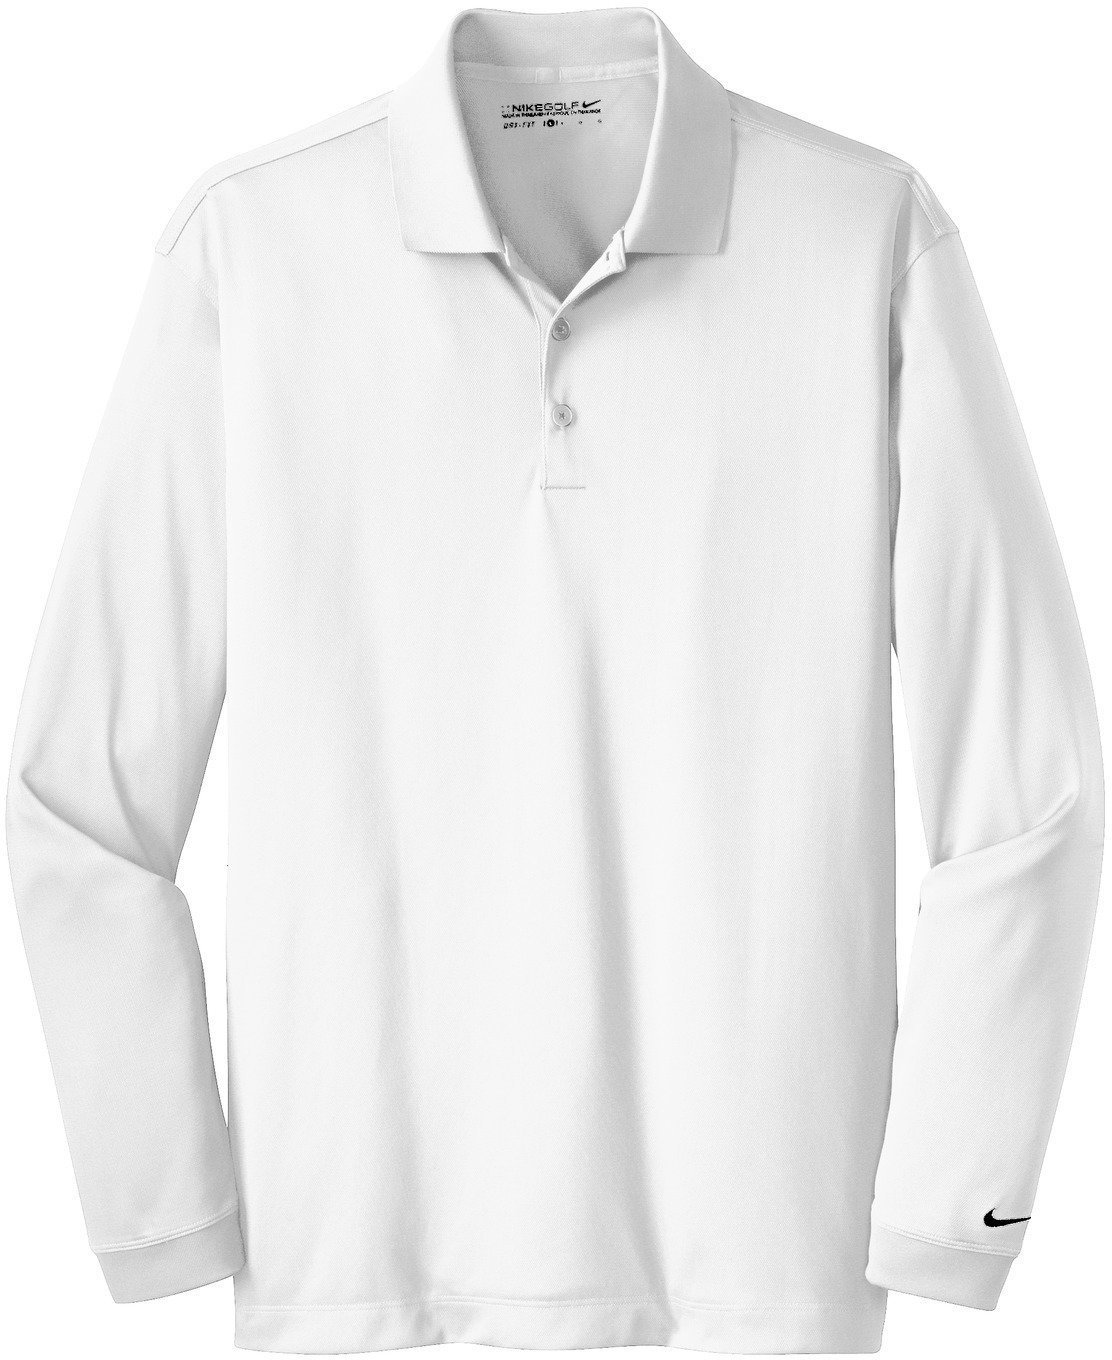 Chemise polo Nike Dry Core Polo Golf Femme Manches Longues White/Black M